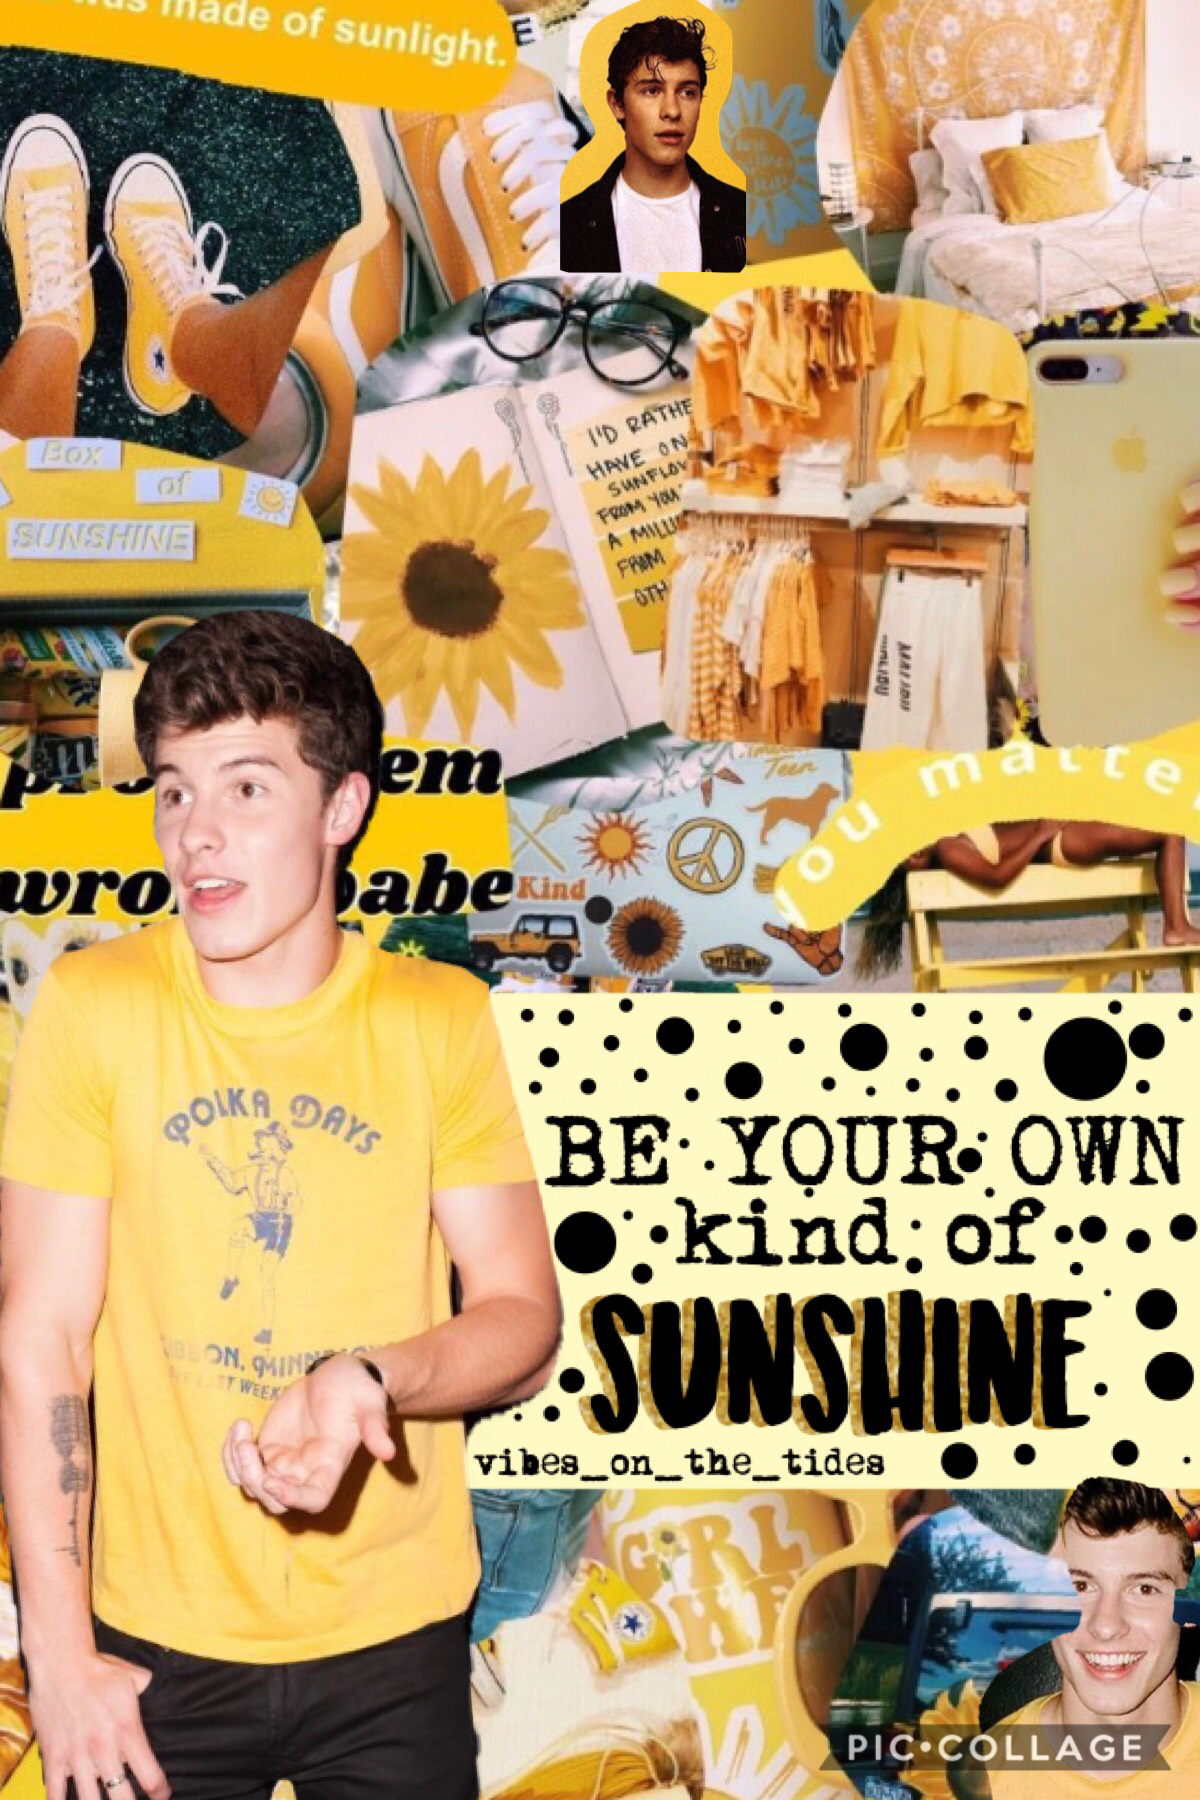 💛tap💛
yess i love this one!😱👏🏼
haha sorry 
number 5 of theme? idk anymore 
qotd// fav artist atm?
aotd// at the moment like right right now... walker hayes, he a county singer 😛😂
BUT...shawn is always my favorite 😂💗💖💓💞 obviously 😂
okkk bye for now! 
